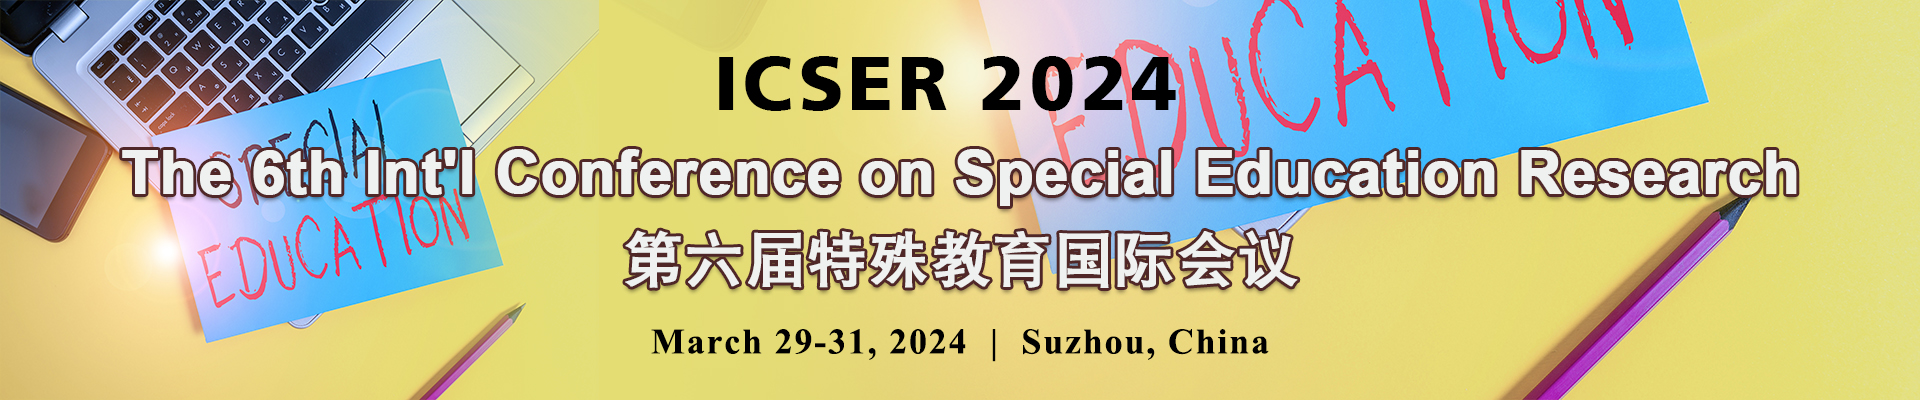 The 6th Int'l Conference on Special Education Research (ICSER 2024), Suzhou, Jiangsu, China